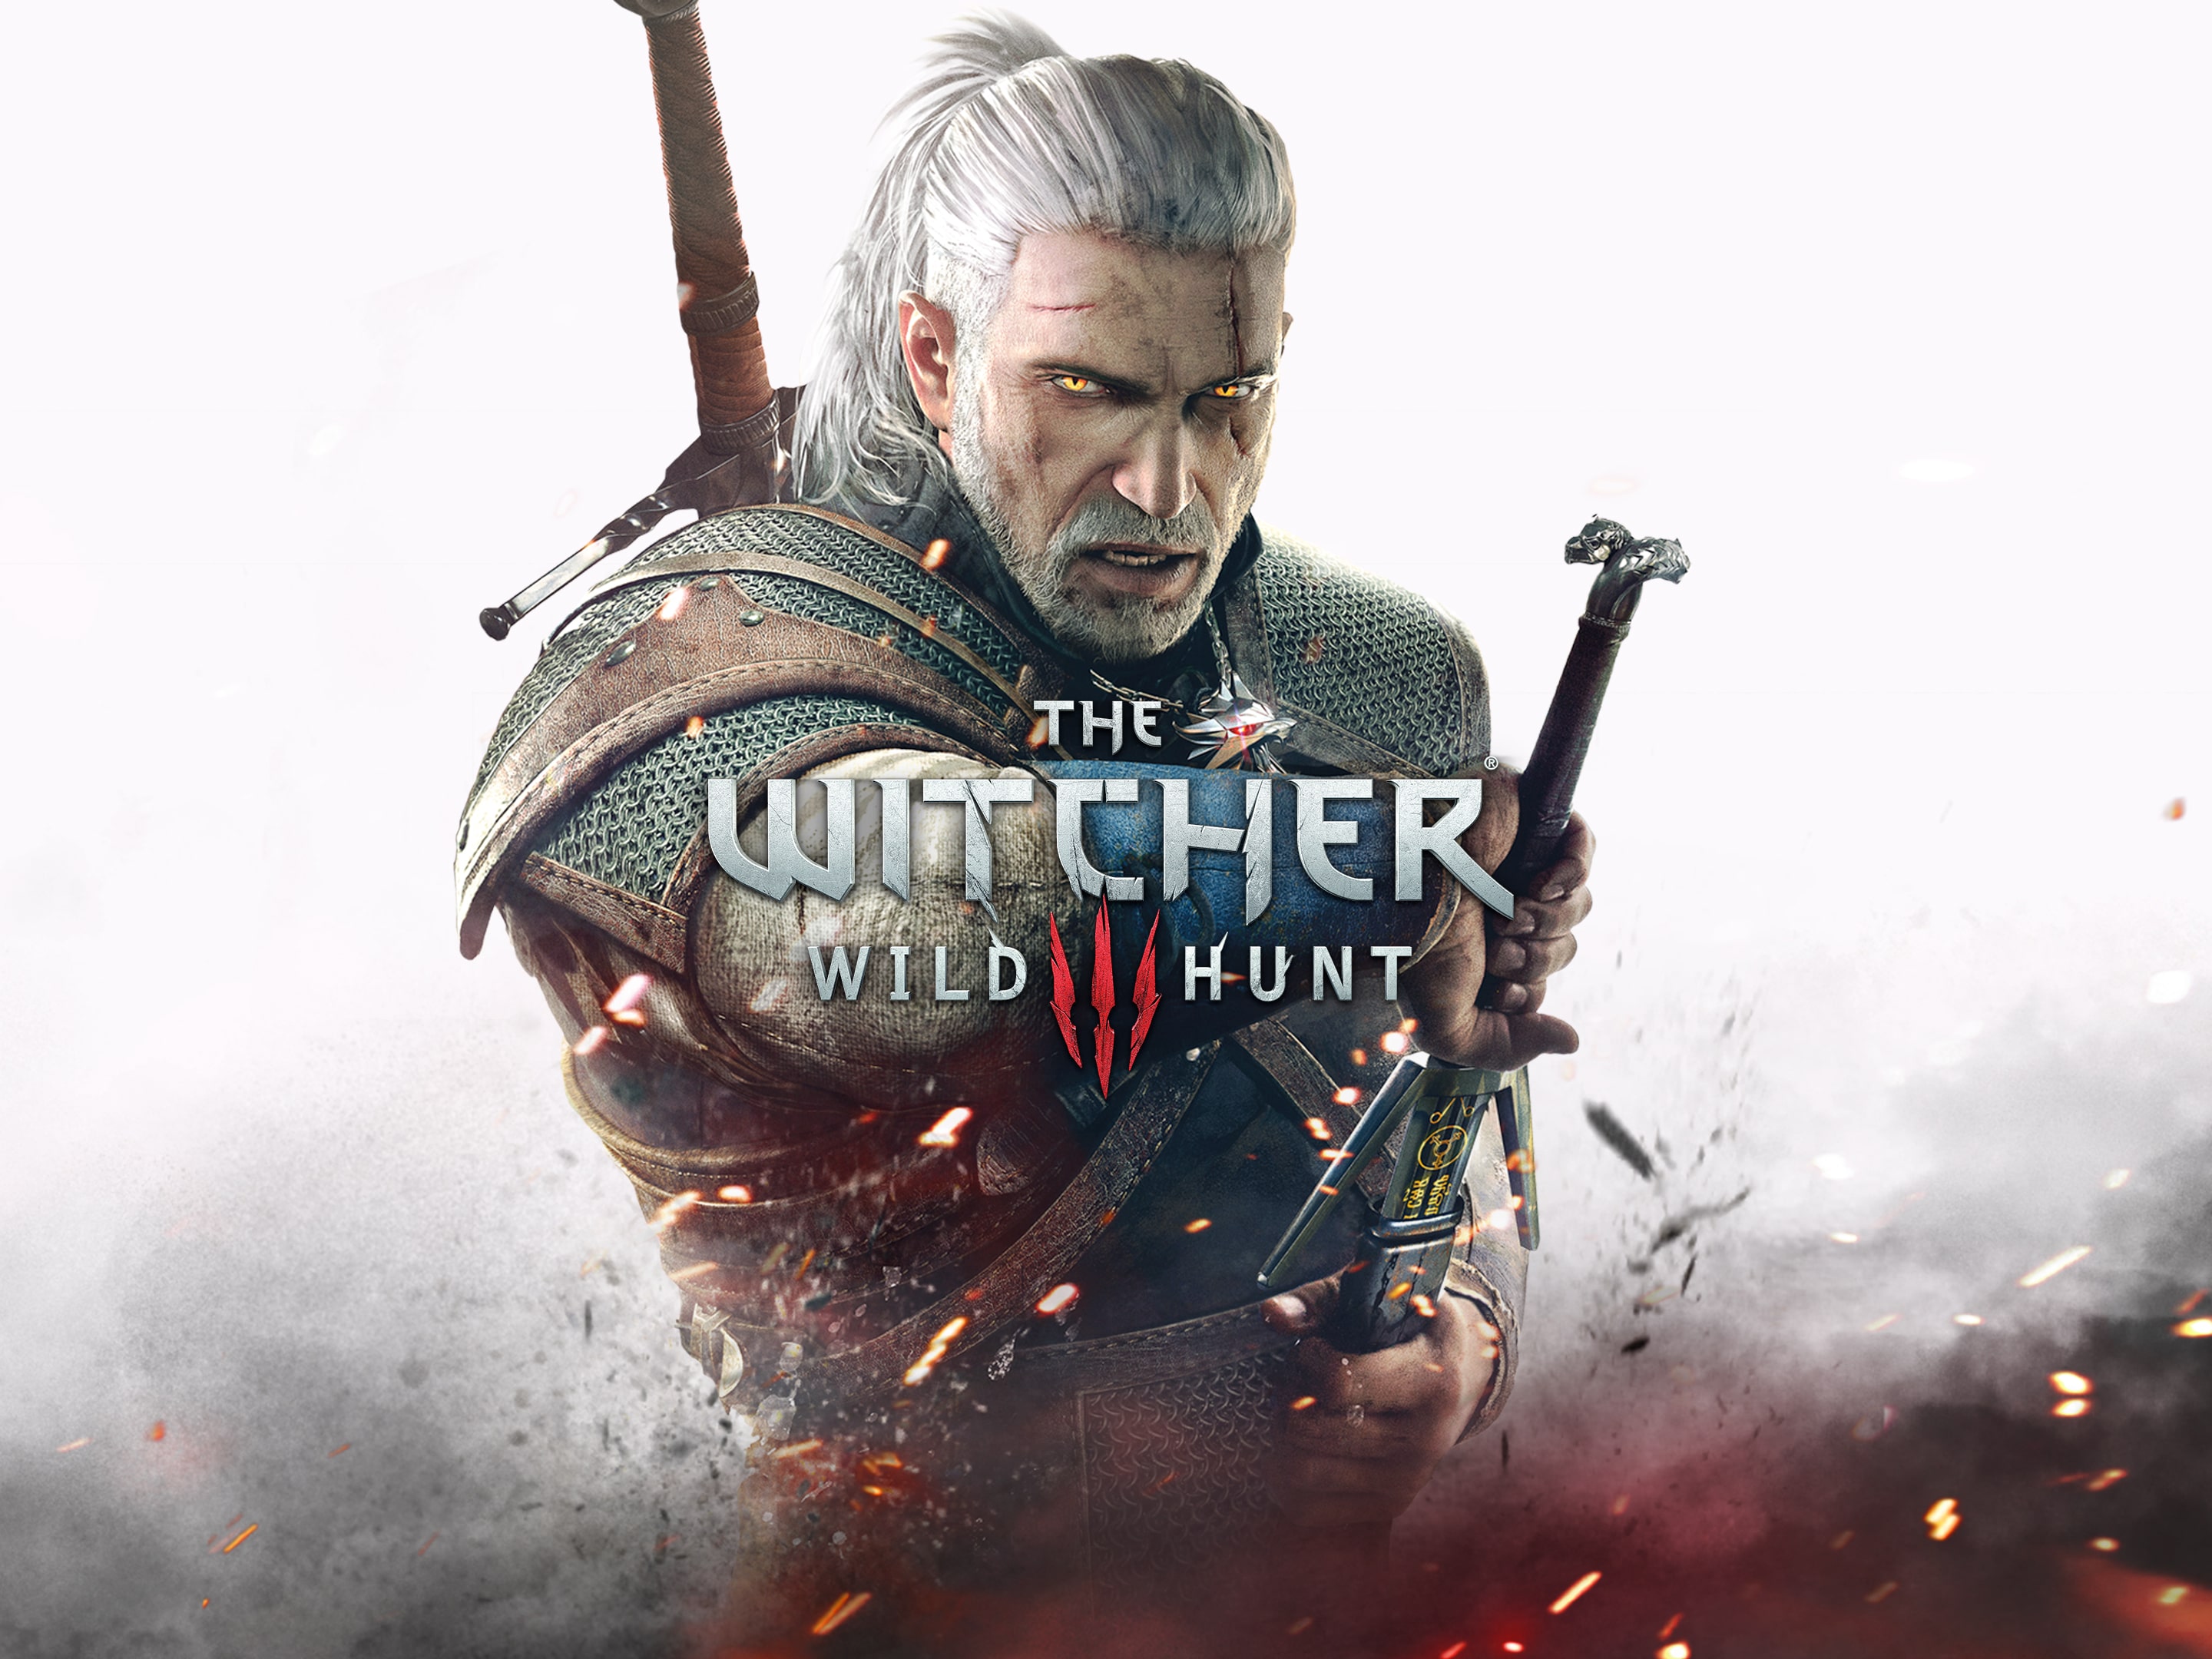 the witcher 3 ps4 cover